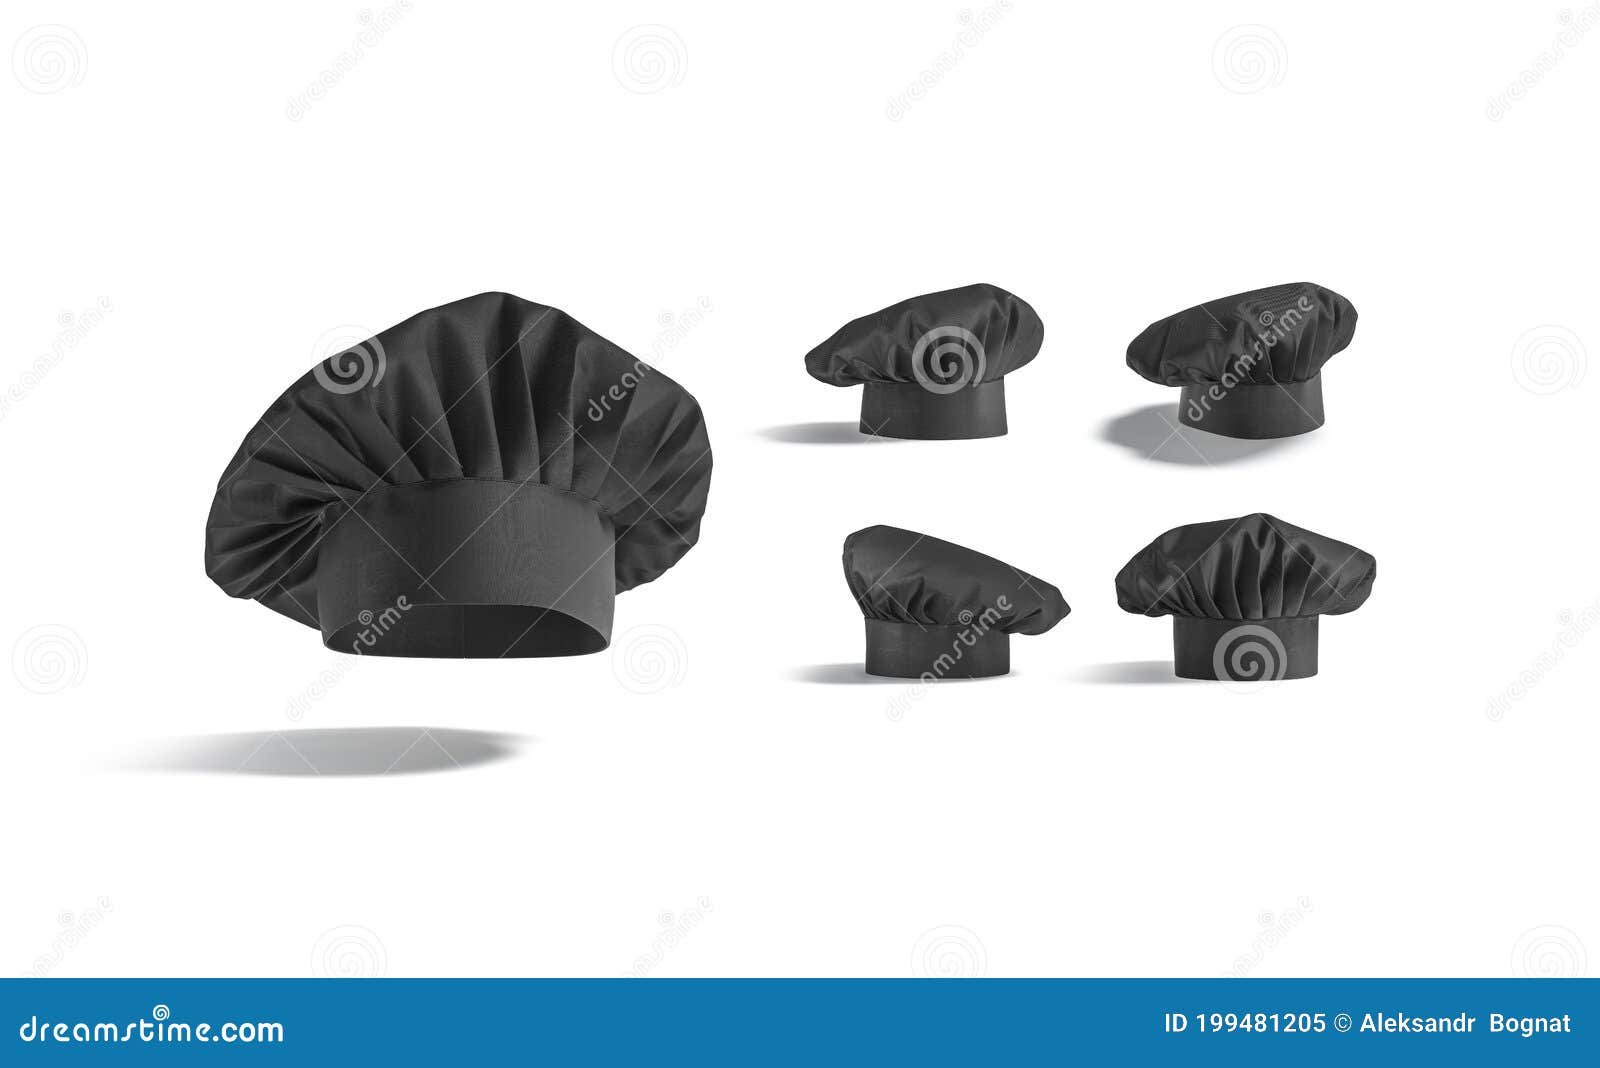 Download Blank Black Toque Chef Hat Mockup, Different Views Stock ...